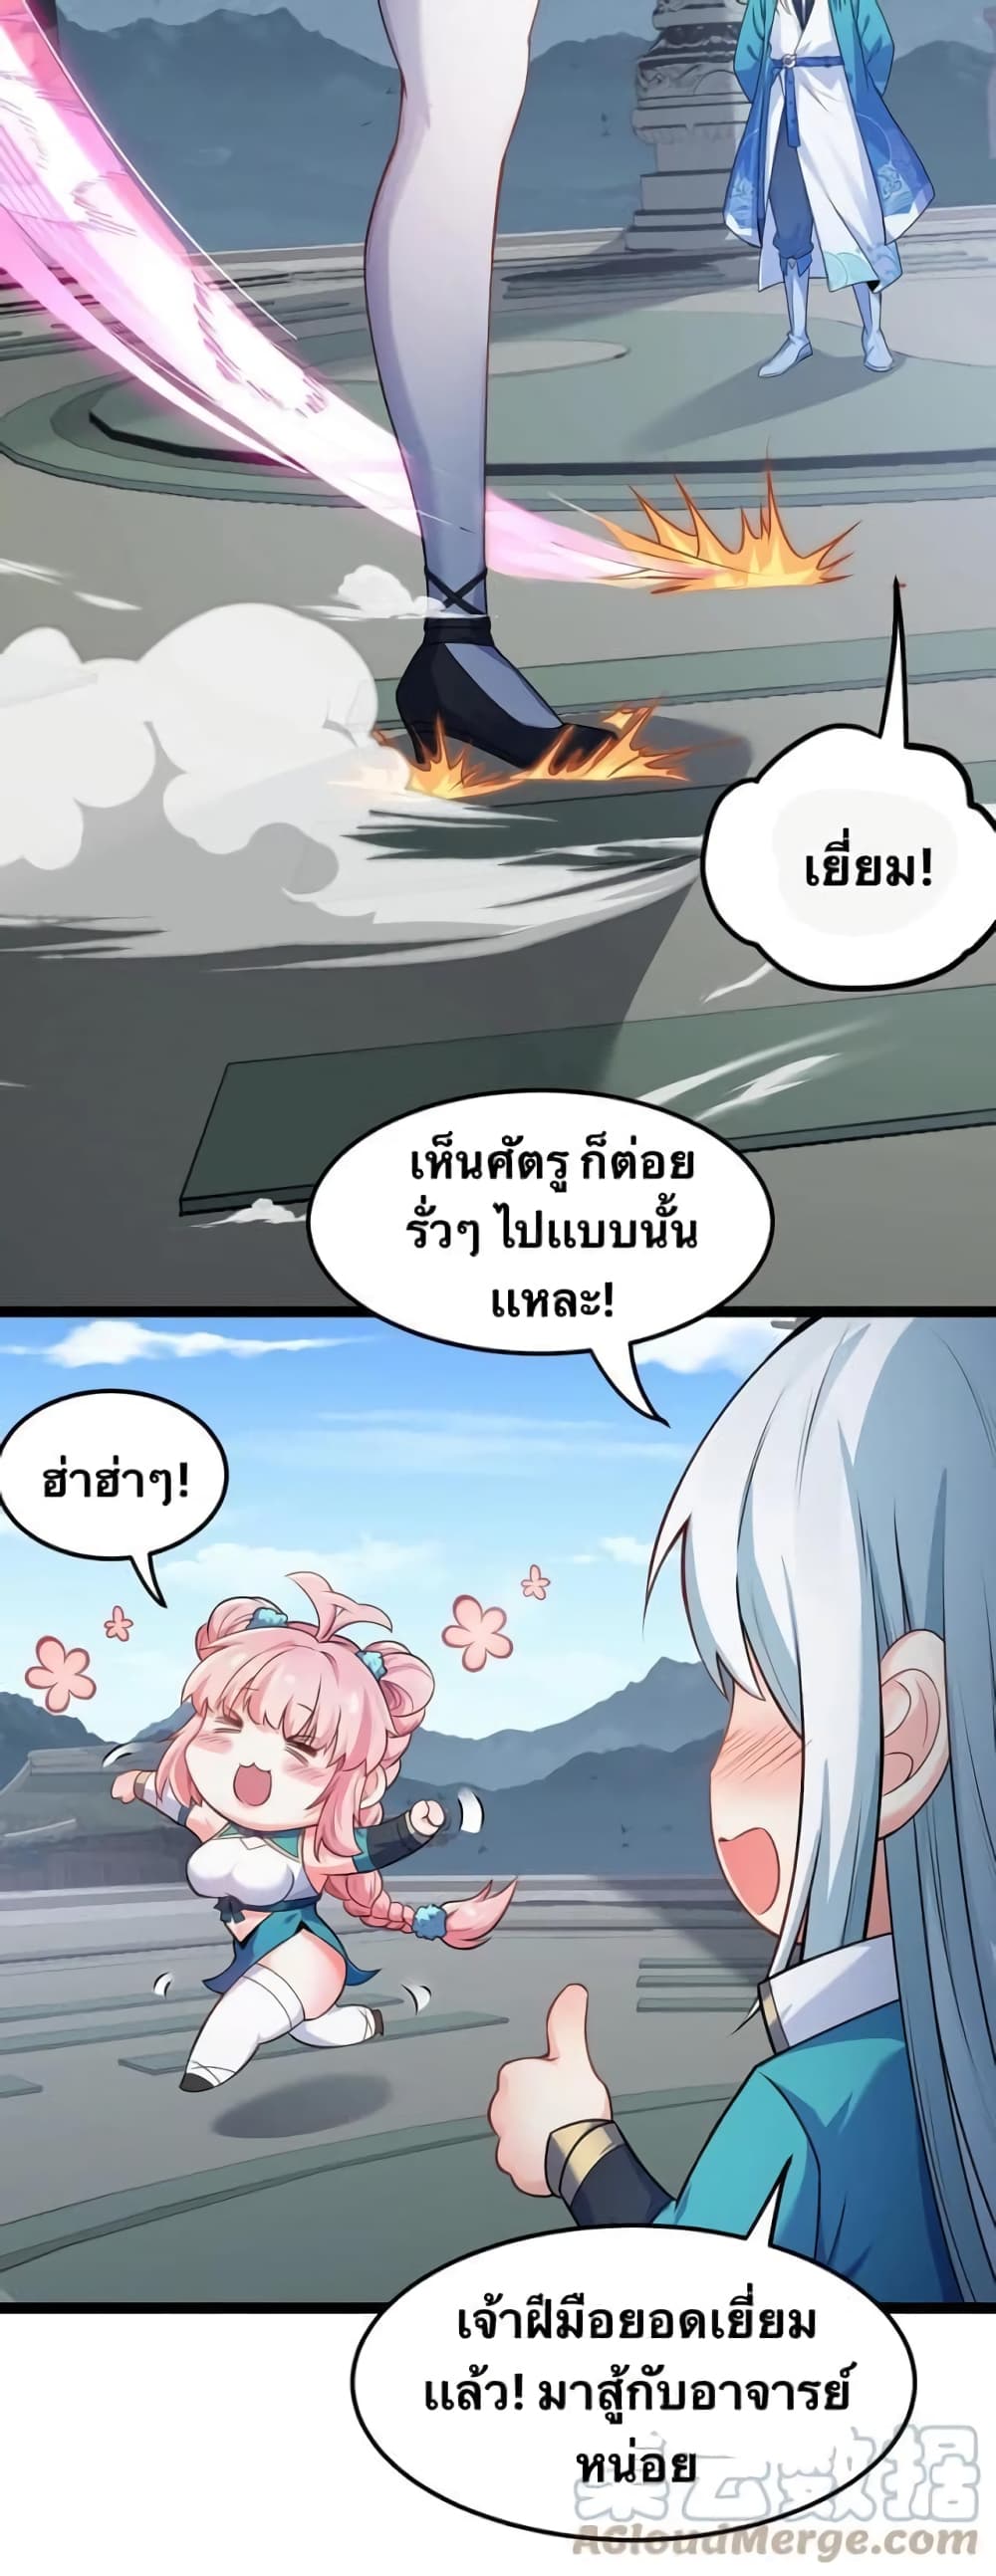 Godsian Masian from Another World ตอนที่ 95 (8)